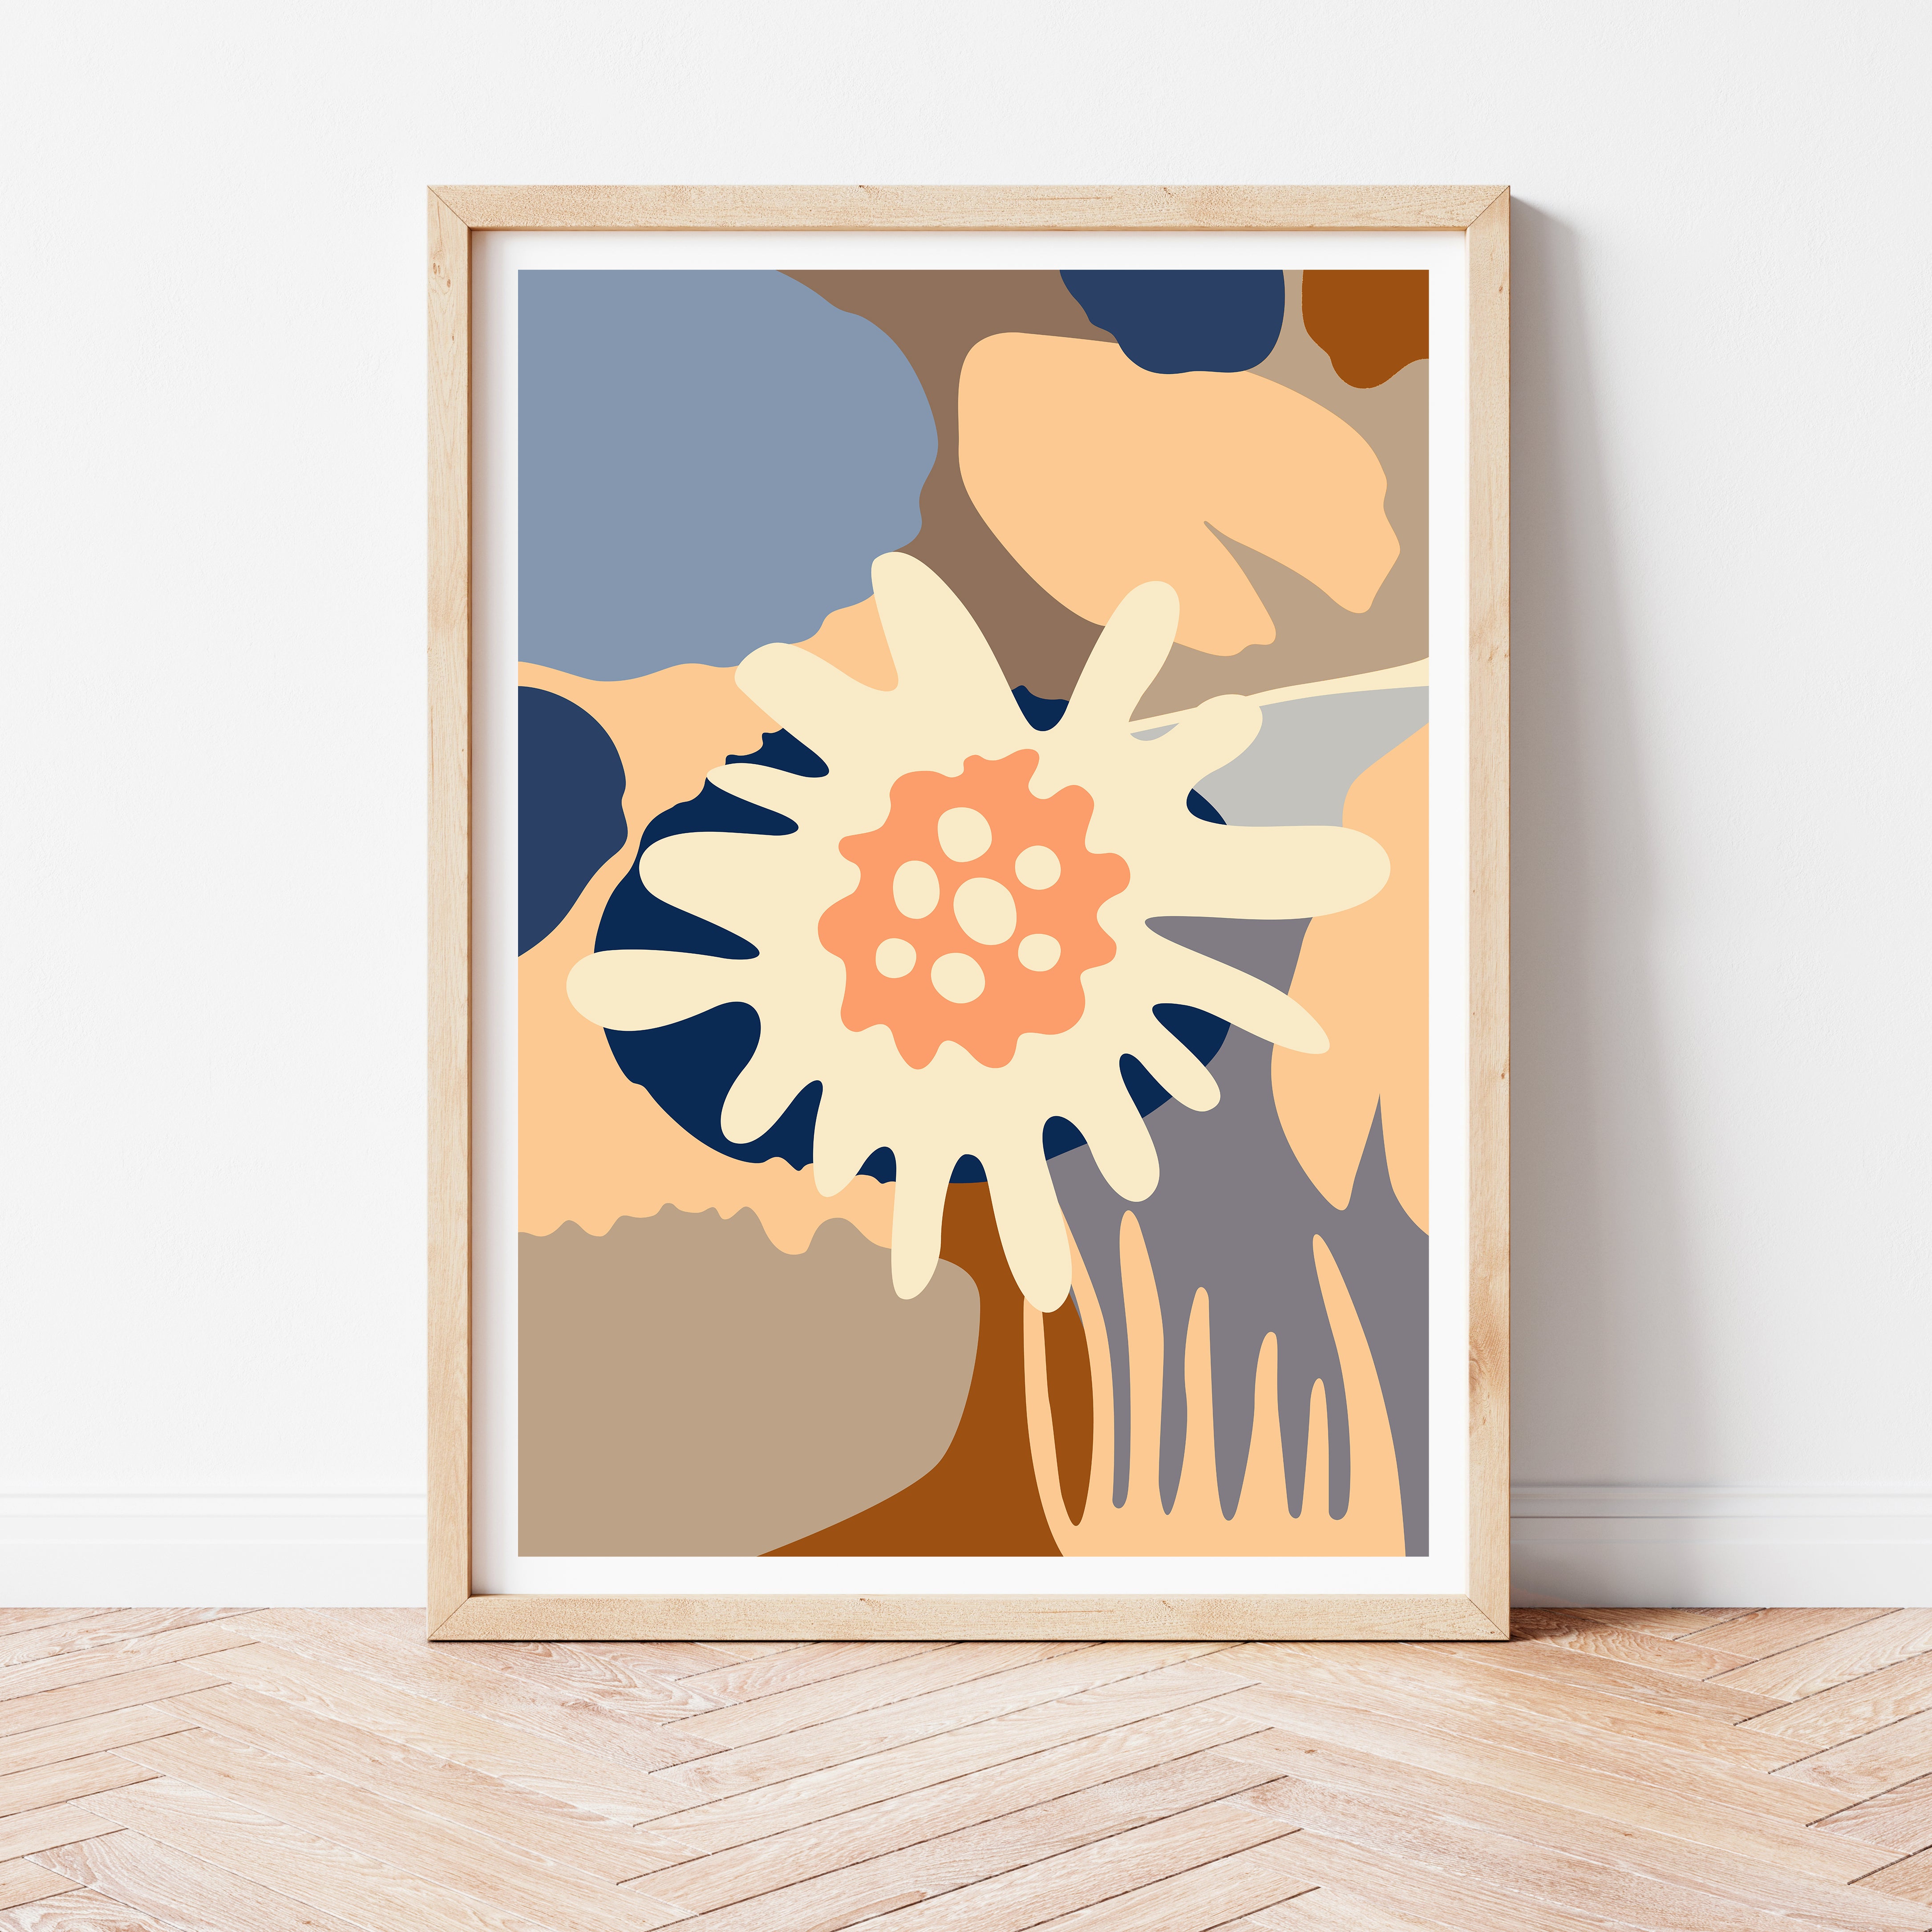 neutral toned earthy toned colourful artwork of flowers and cactus from australian artist